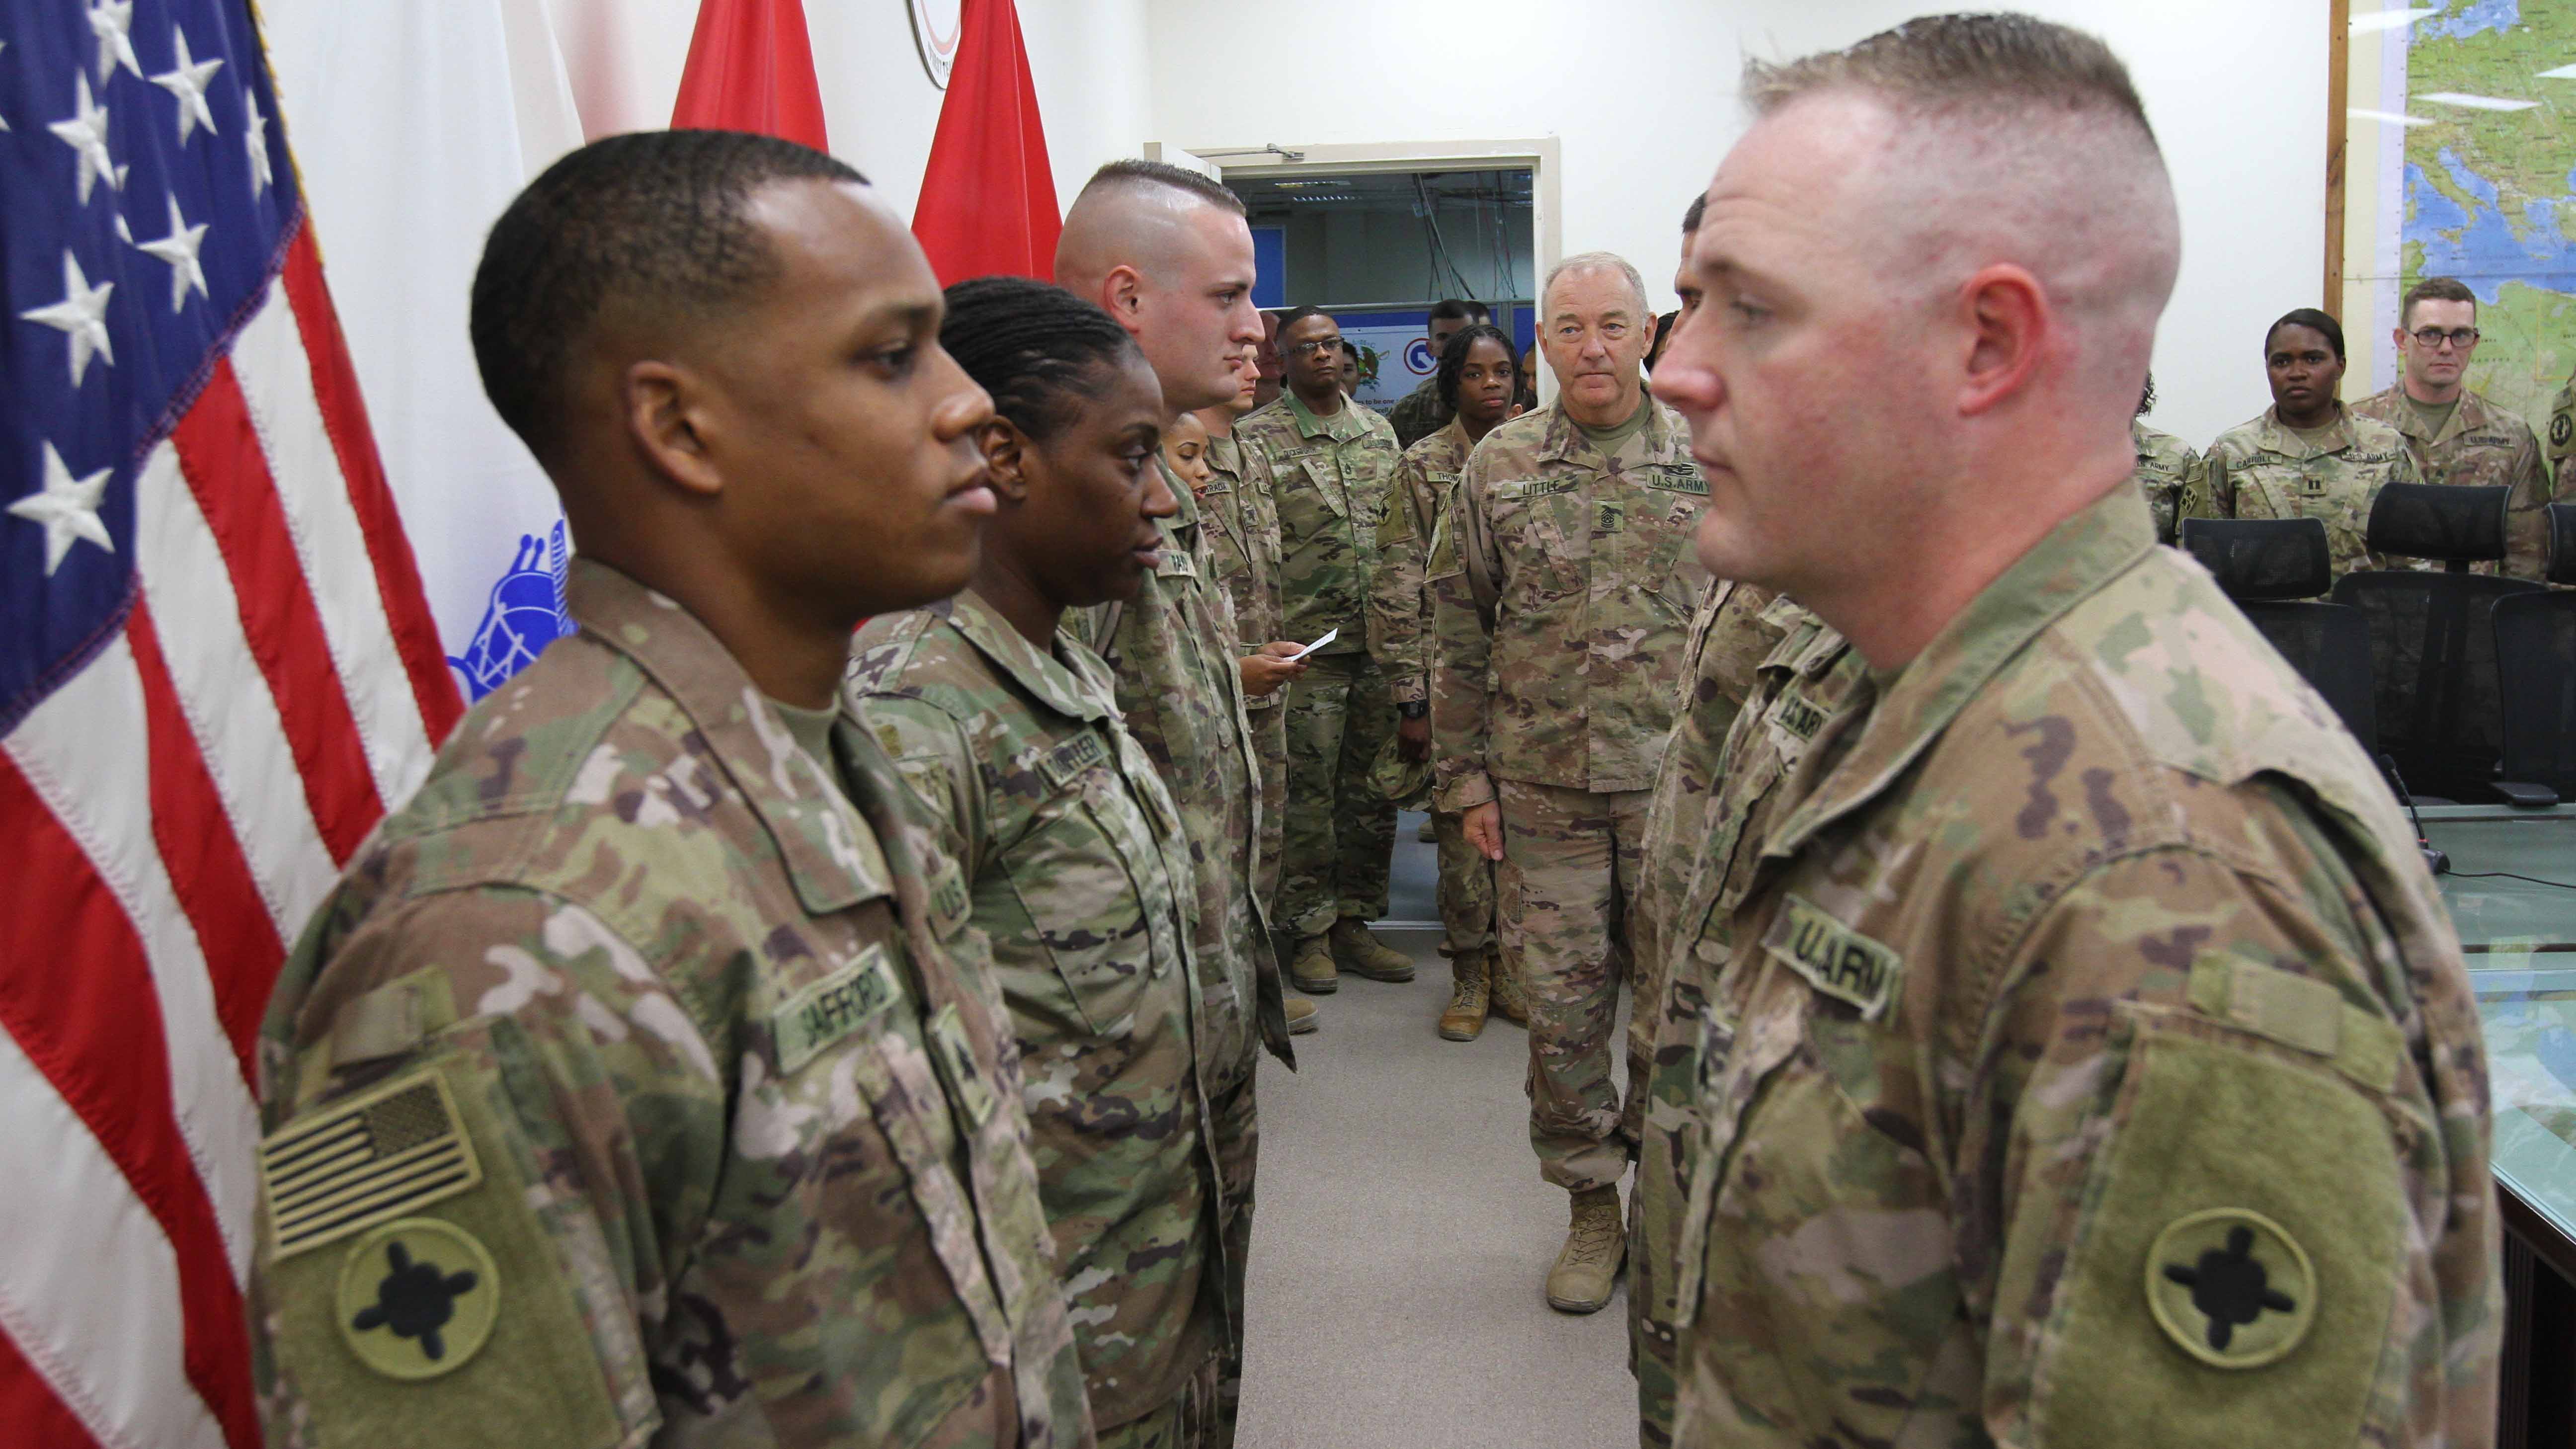 Soliders standing in line to be promoted